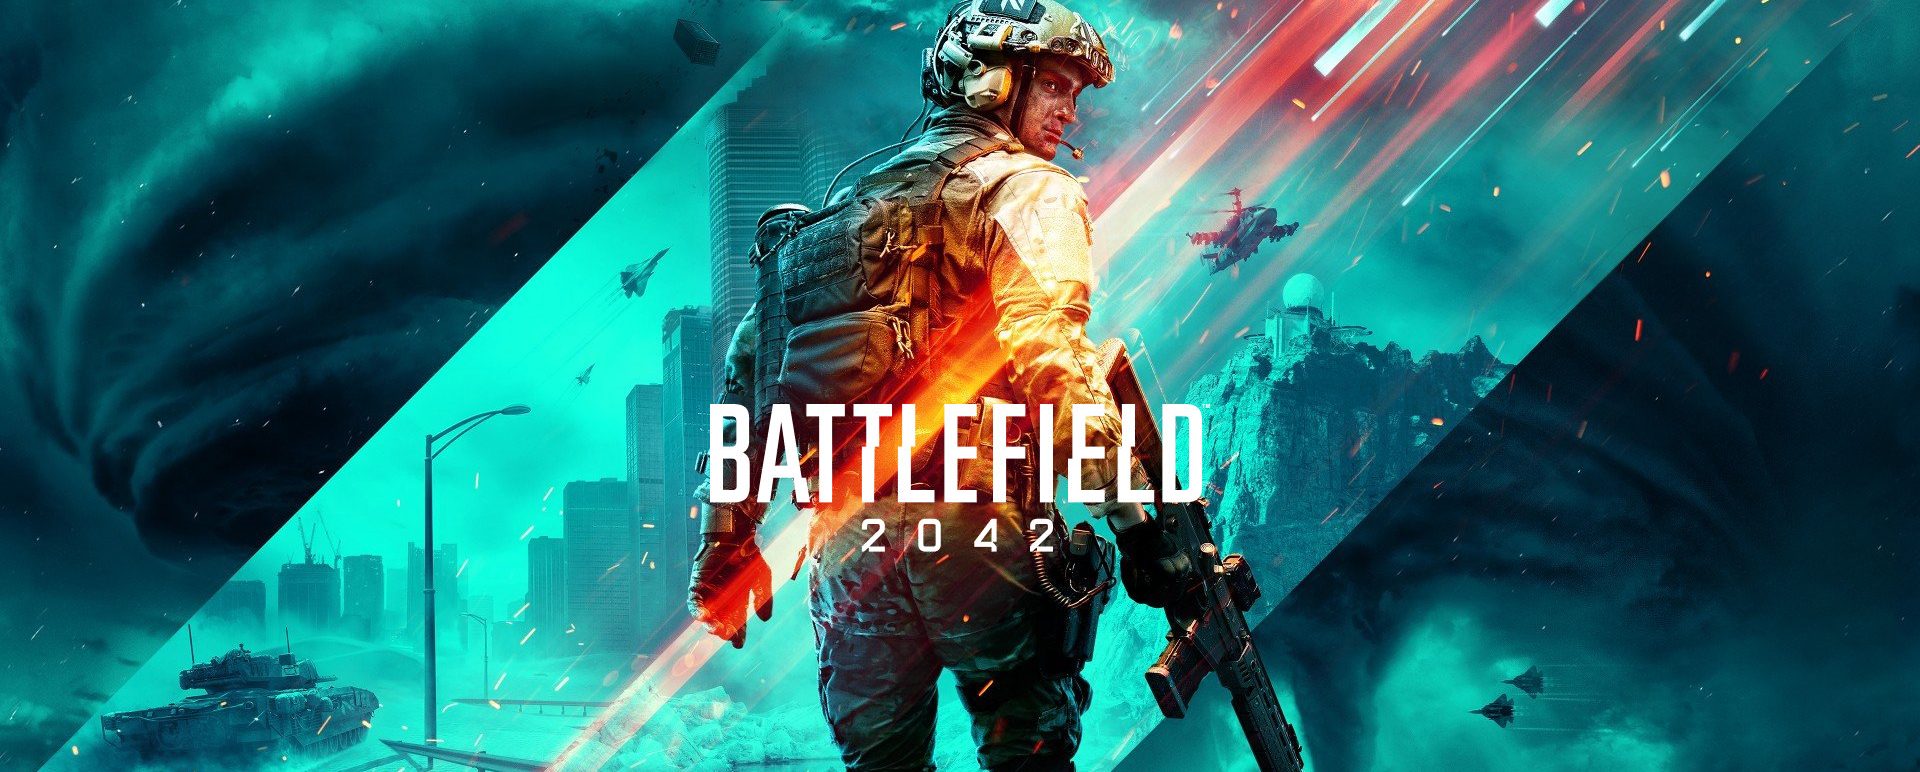 on Battlefield 2042 One/Series Xbox X|S, October on 22nd PS4/5 PCs and launches